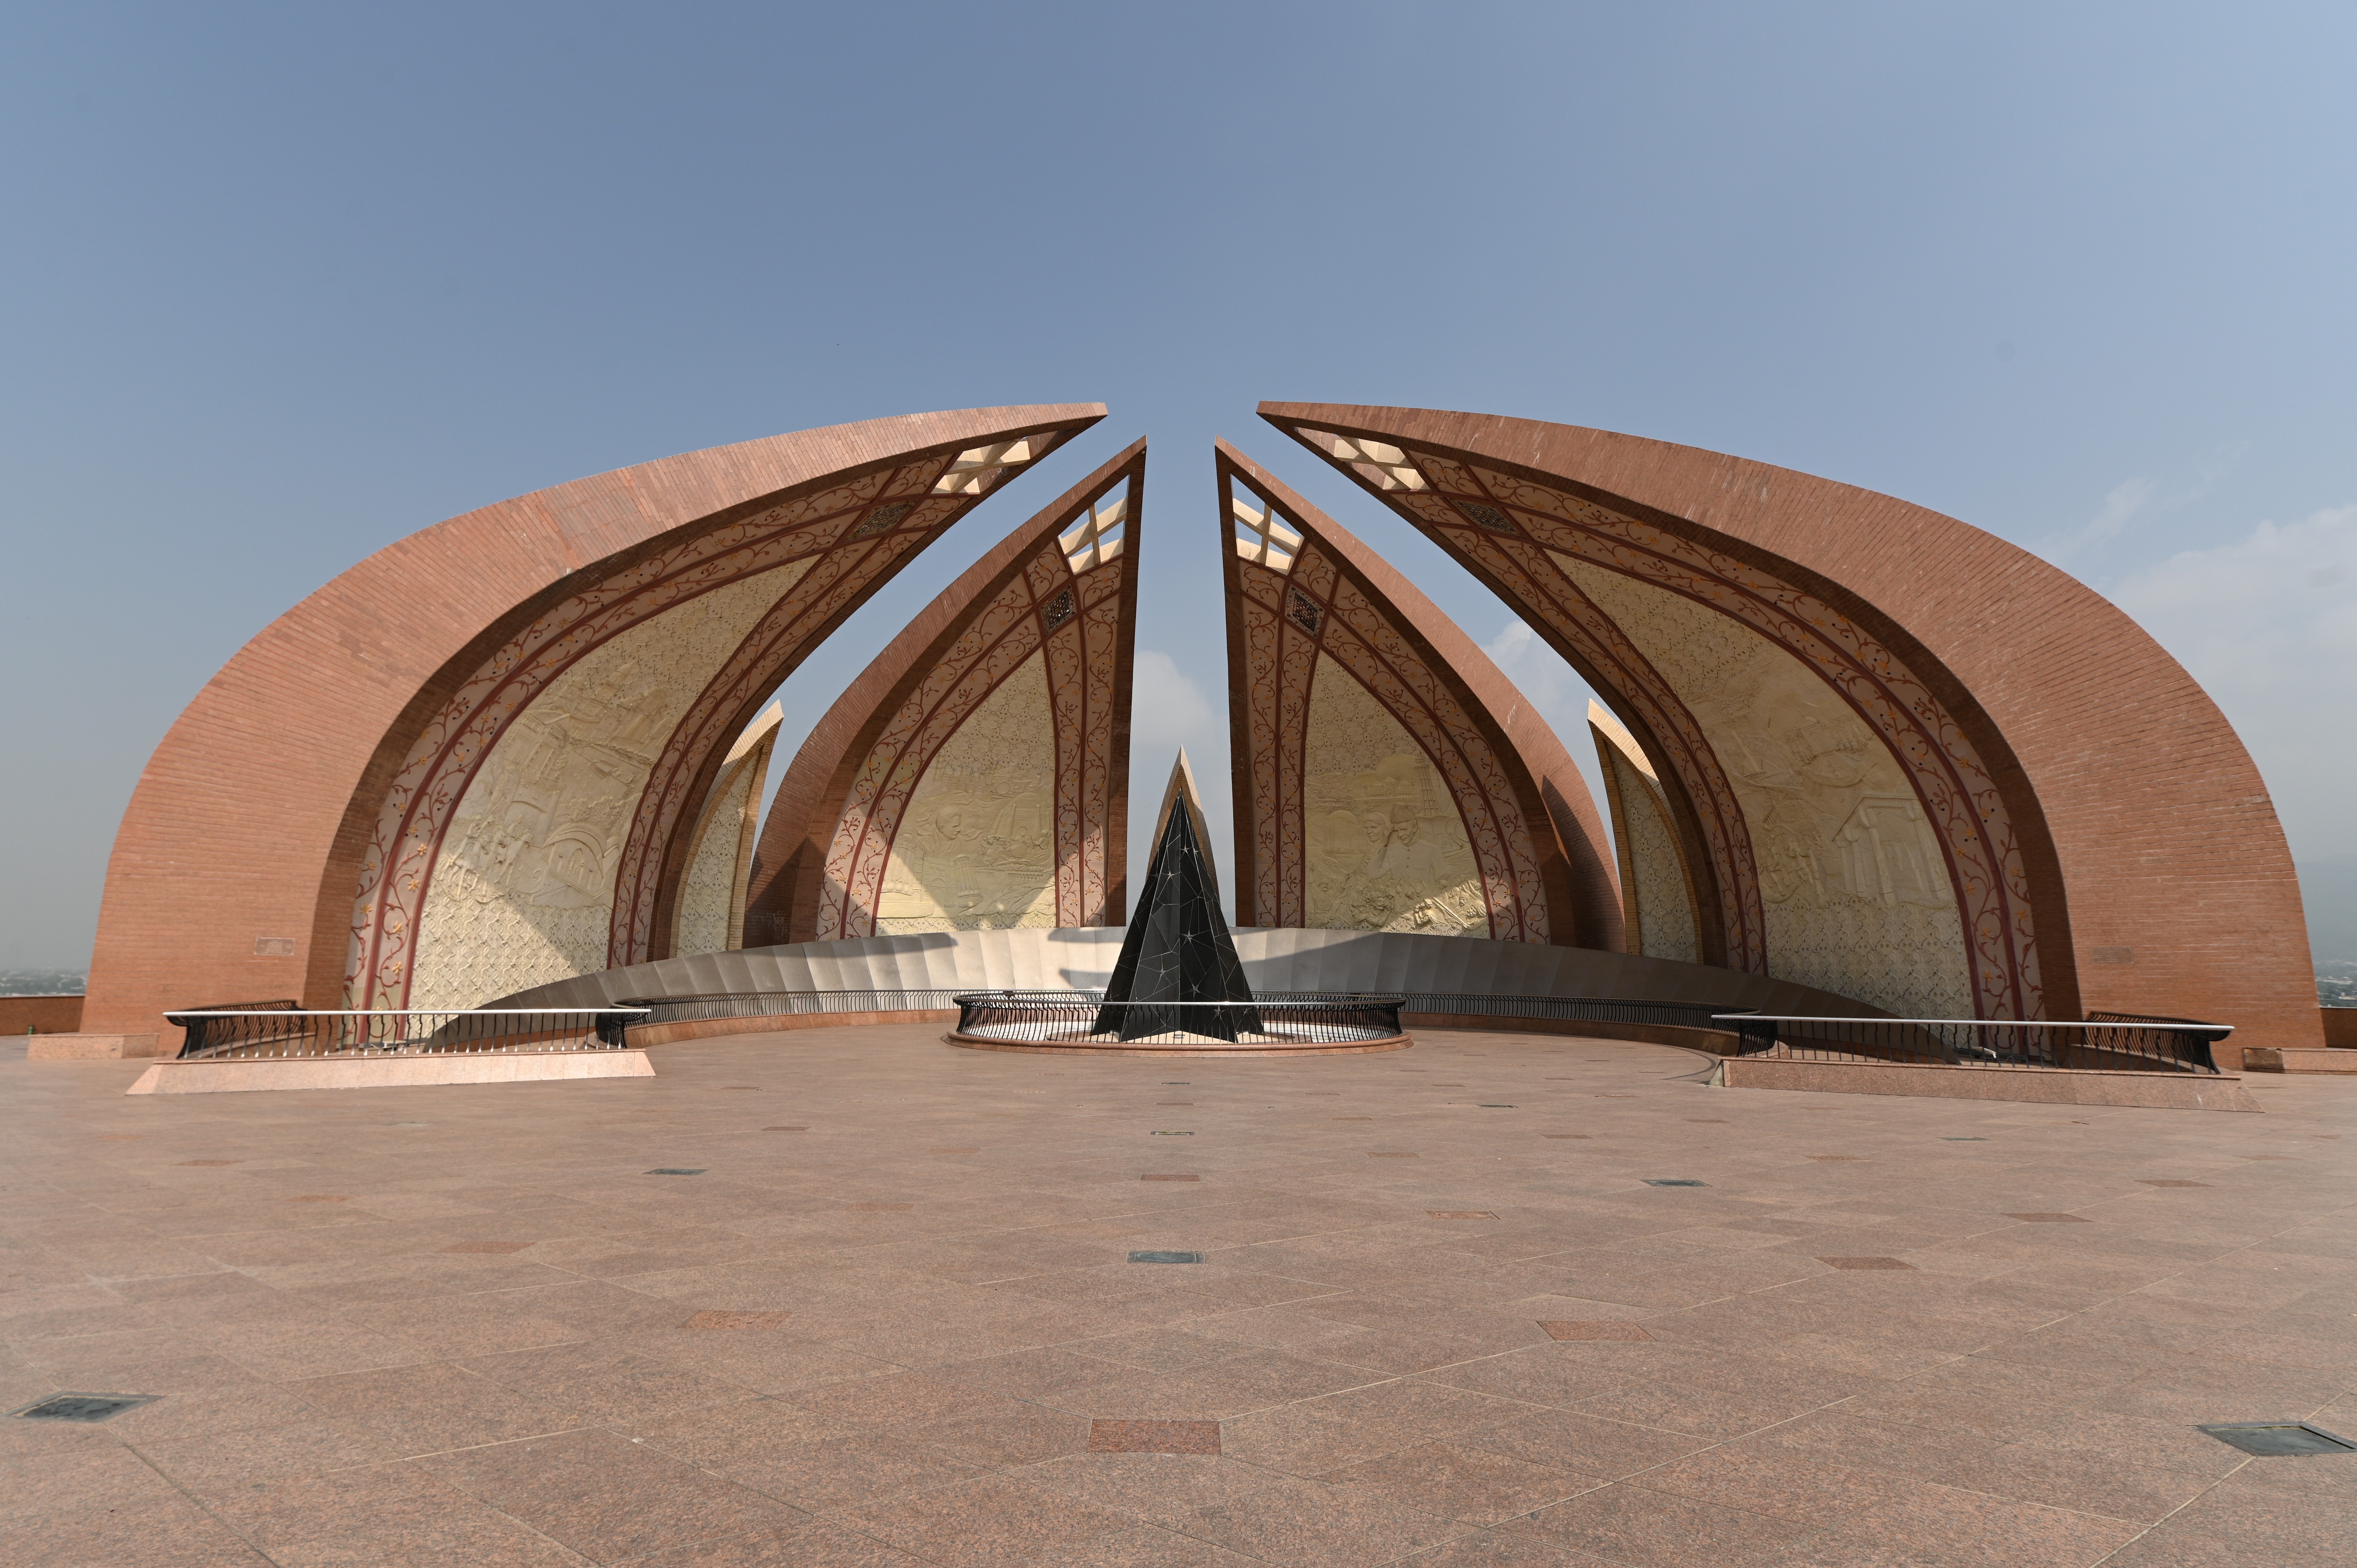 Pakistan monument: The National Monument and Heritage museum of Pakistan